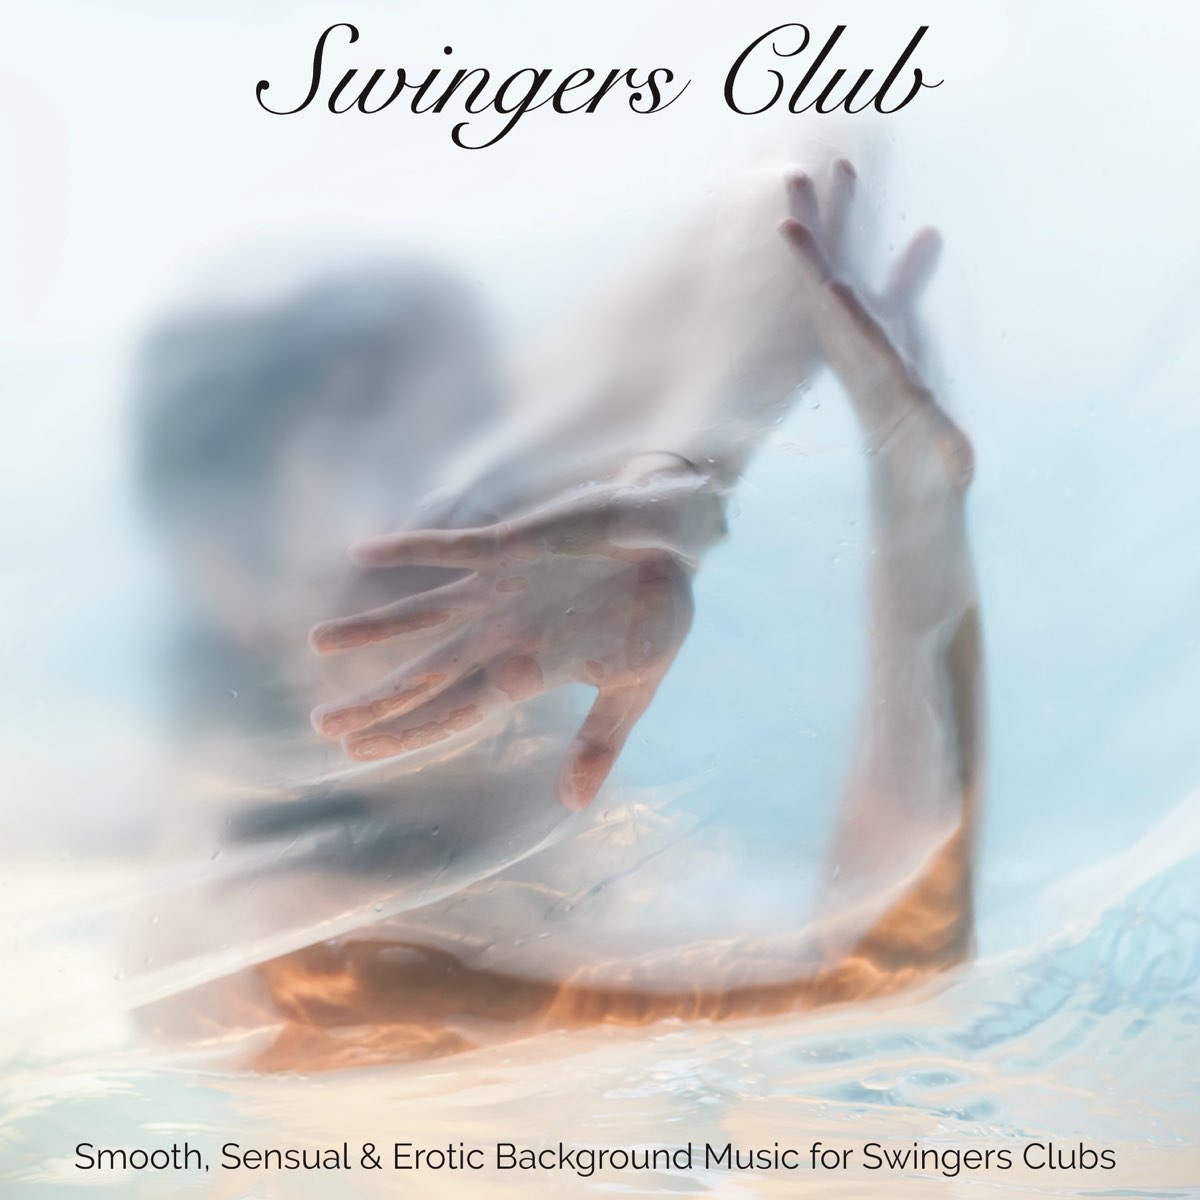 Swingers Club Smooth, Sensual and Erotic Background Music for Swingers Clubs - Album by Erotic Lounge Buddha Chill Out Music Cafe pic